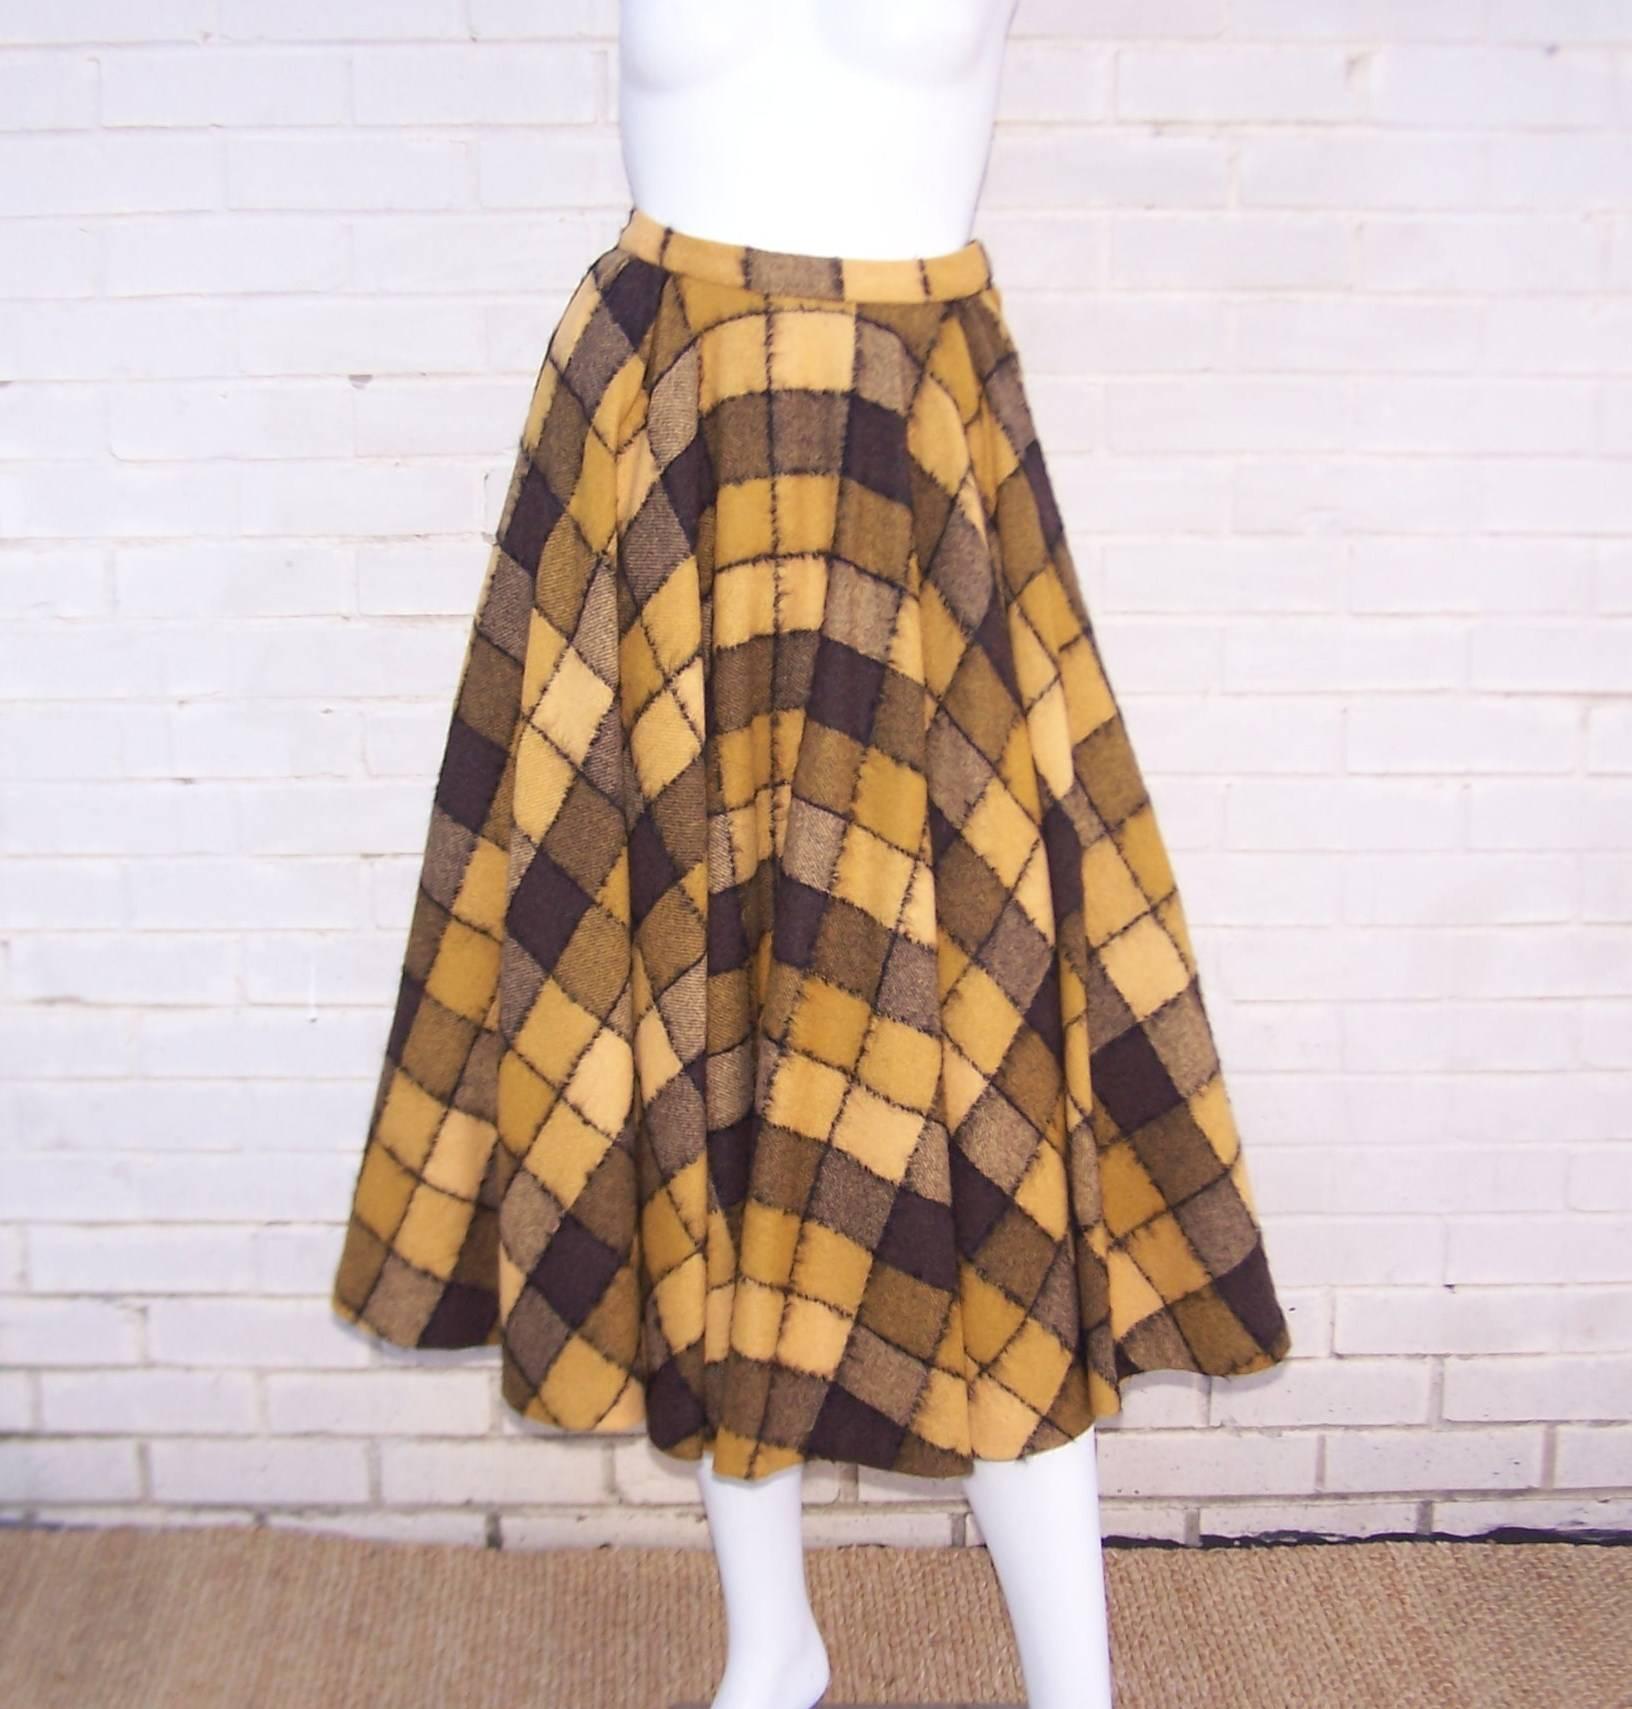 This voluminous checkered golden yellow, brown and black wool skirt by Herbert Labandter  is the perfect 1950's circle silhouette.  The skirt hooks and zips on one side with a generous side pocket on the other side.  The checkerboard print is